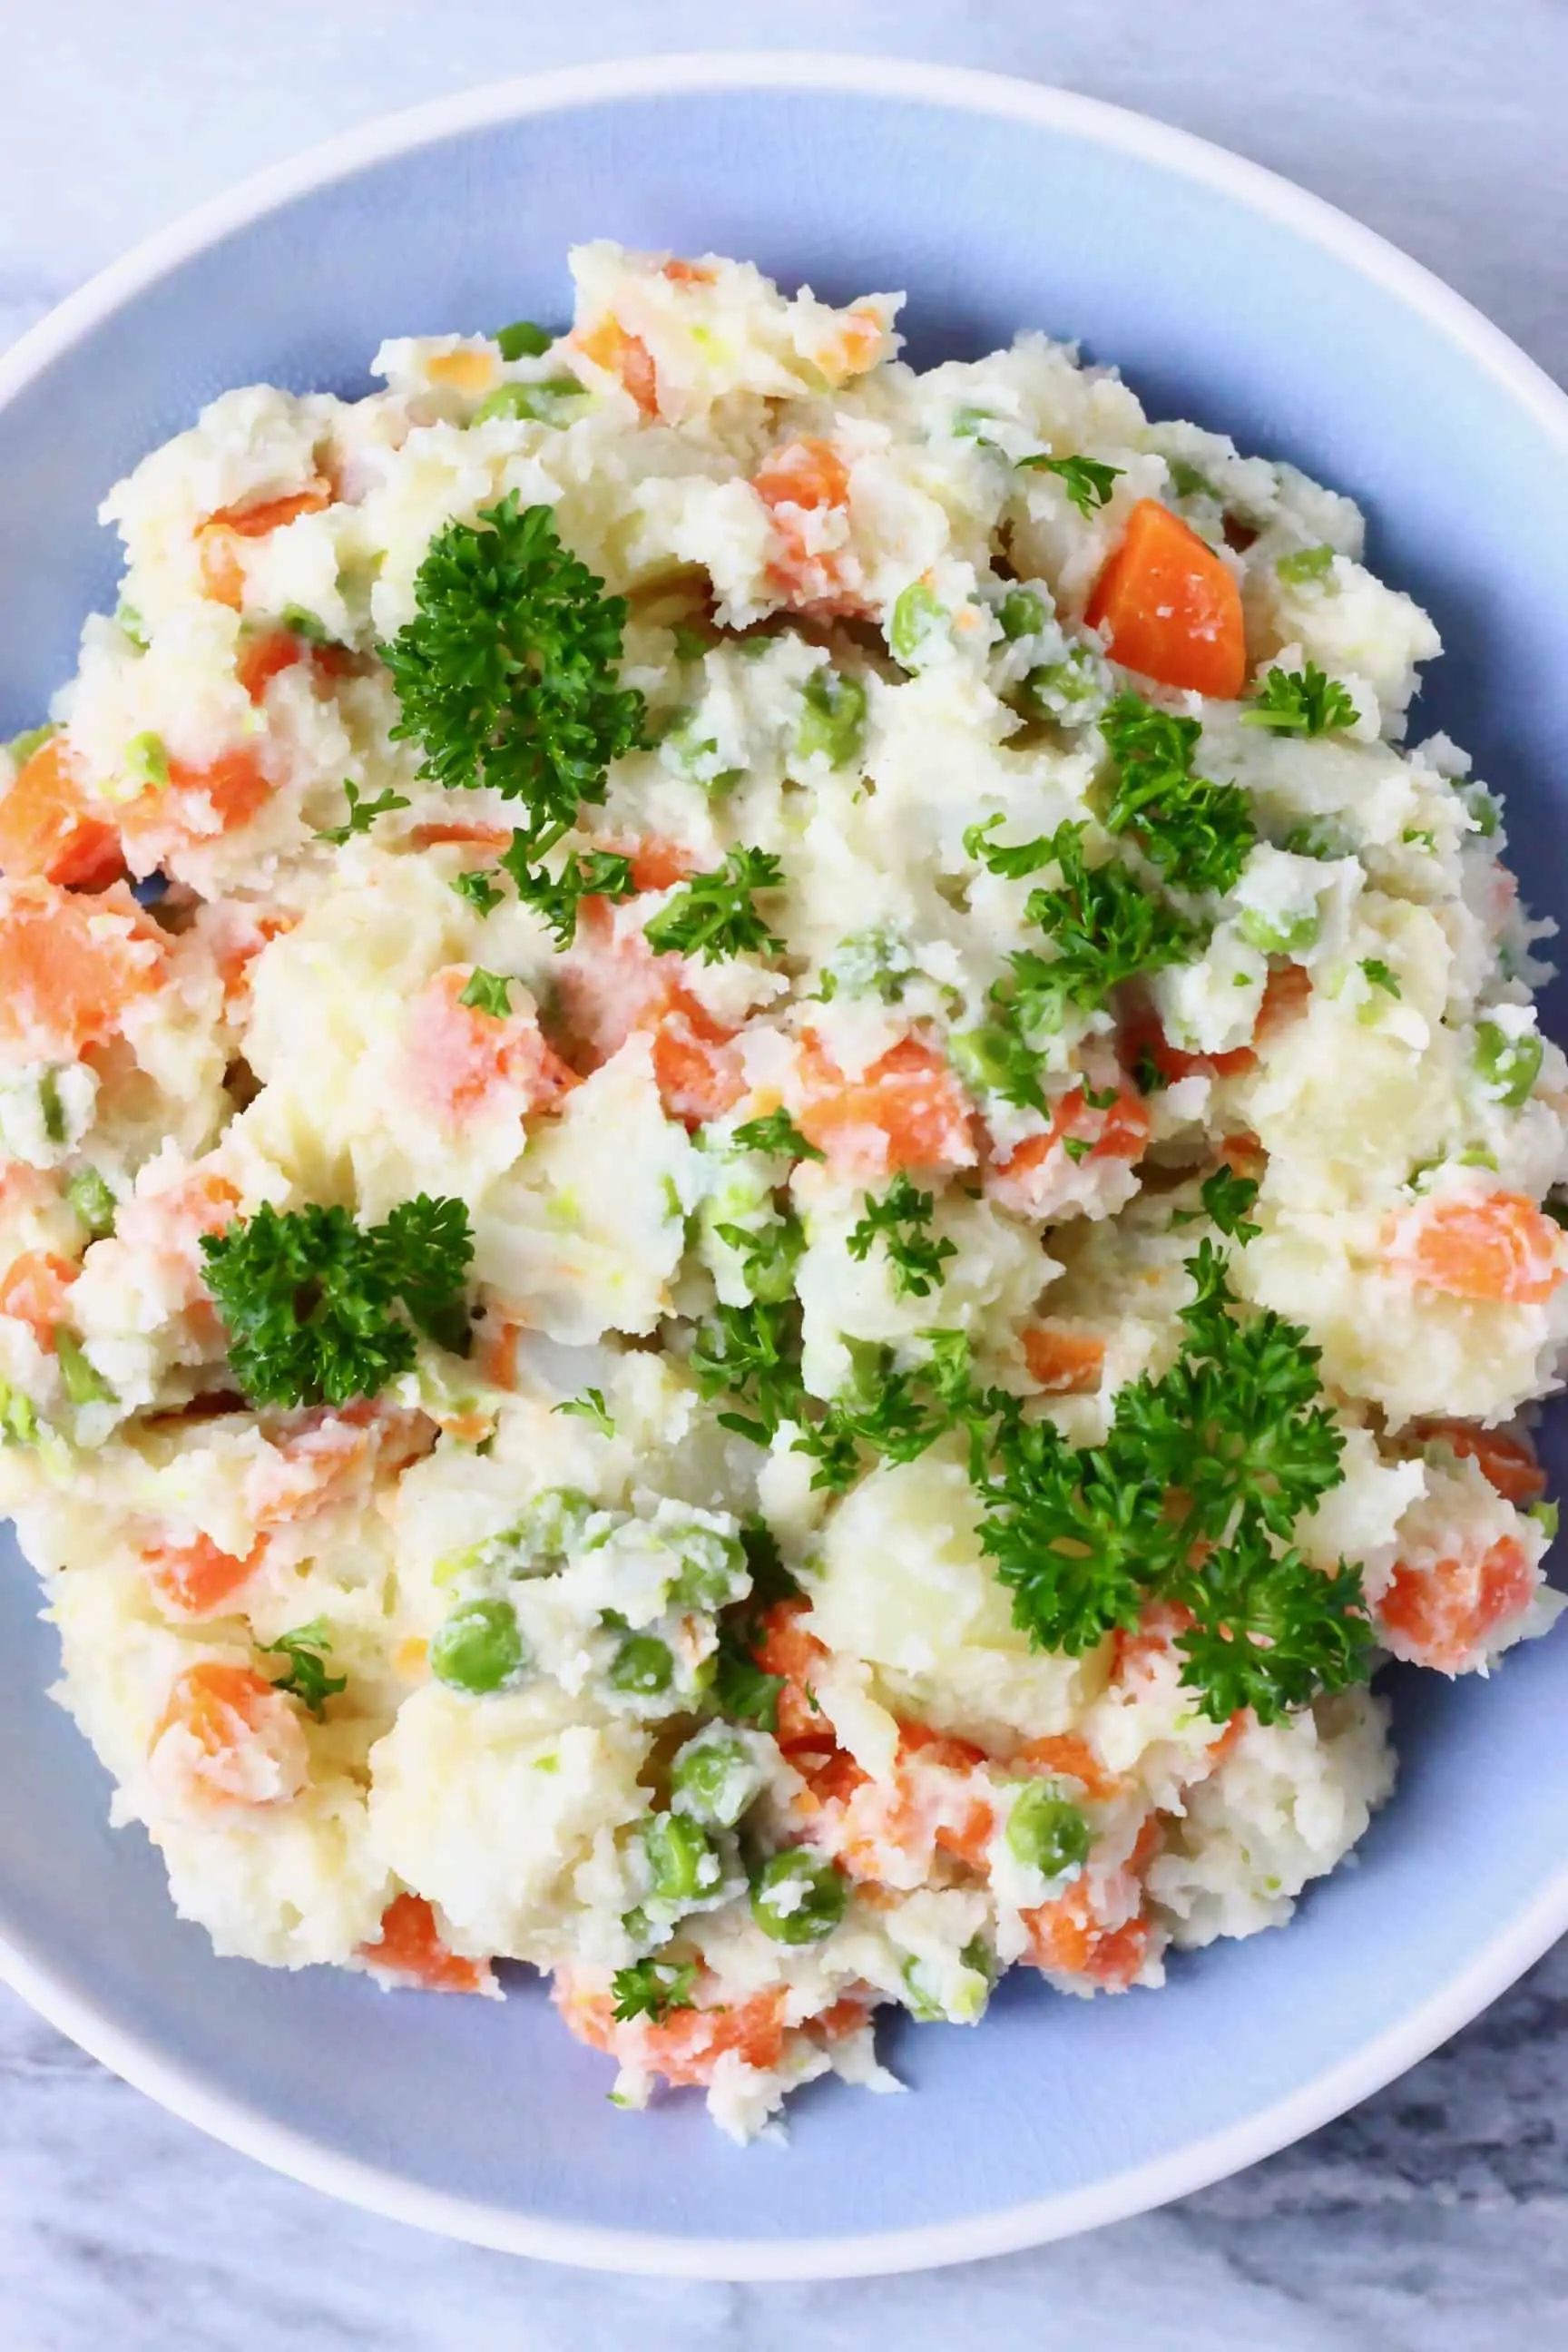 Potato salad with carrots, green peas and mayonnaise in a blue bowl against a marble background